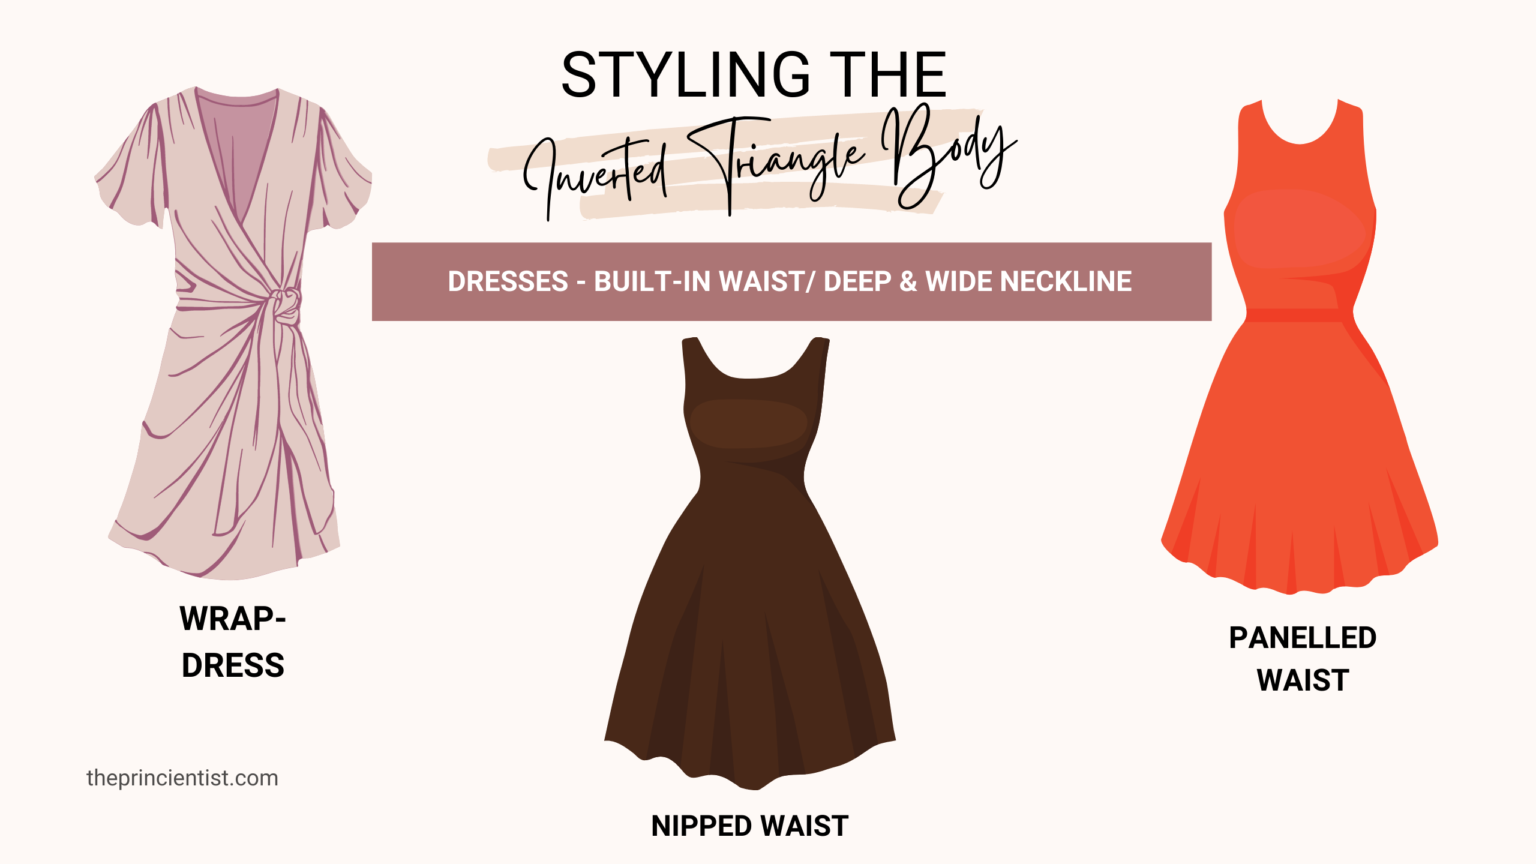 styling the inverted triangle body shape - dresses built-in waist, deep and wide necklines